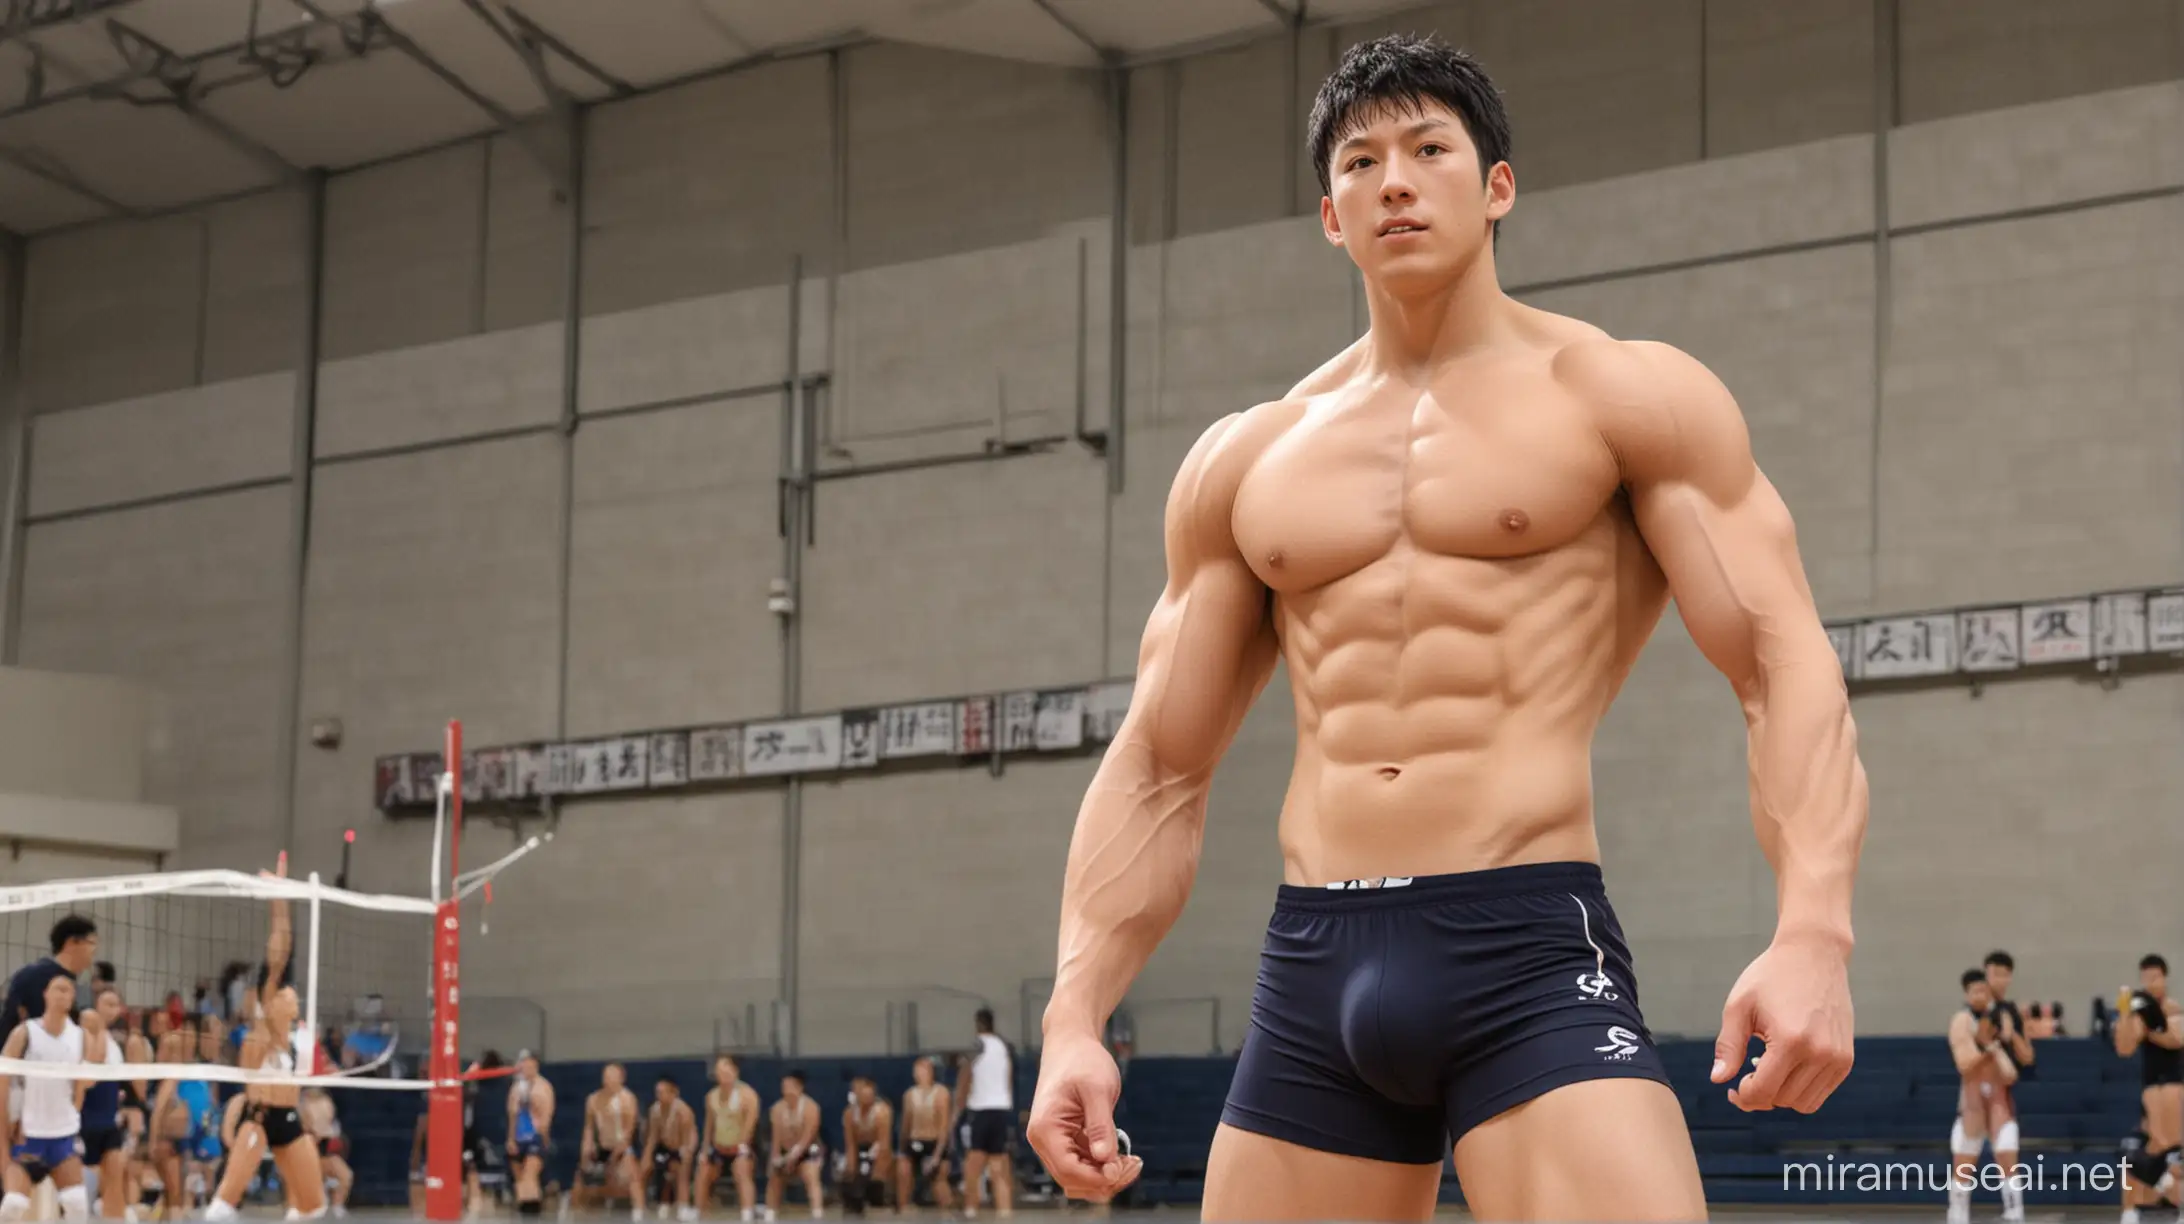 Hinata Shouyou shirtless, very muscular, eight-pack abs, huge biceps, flexing biceps, very tall. In a volleyball court. 